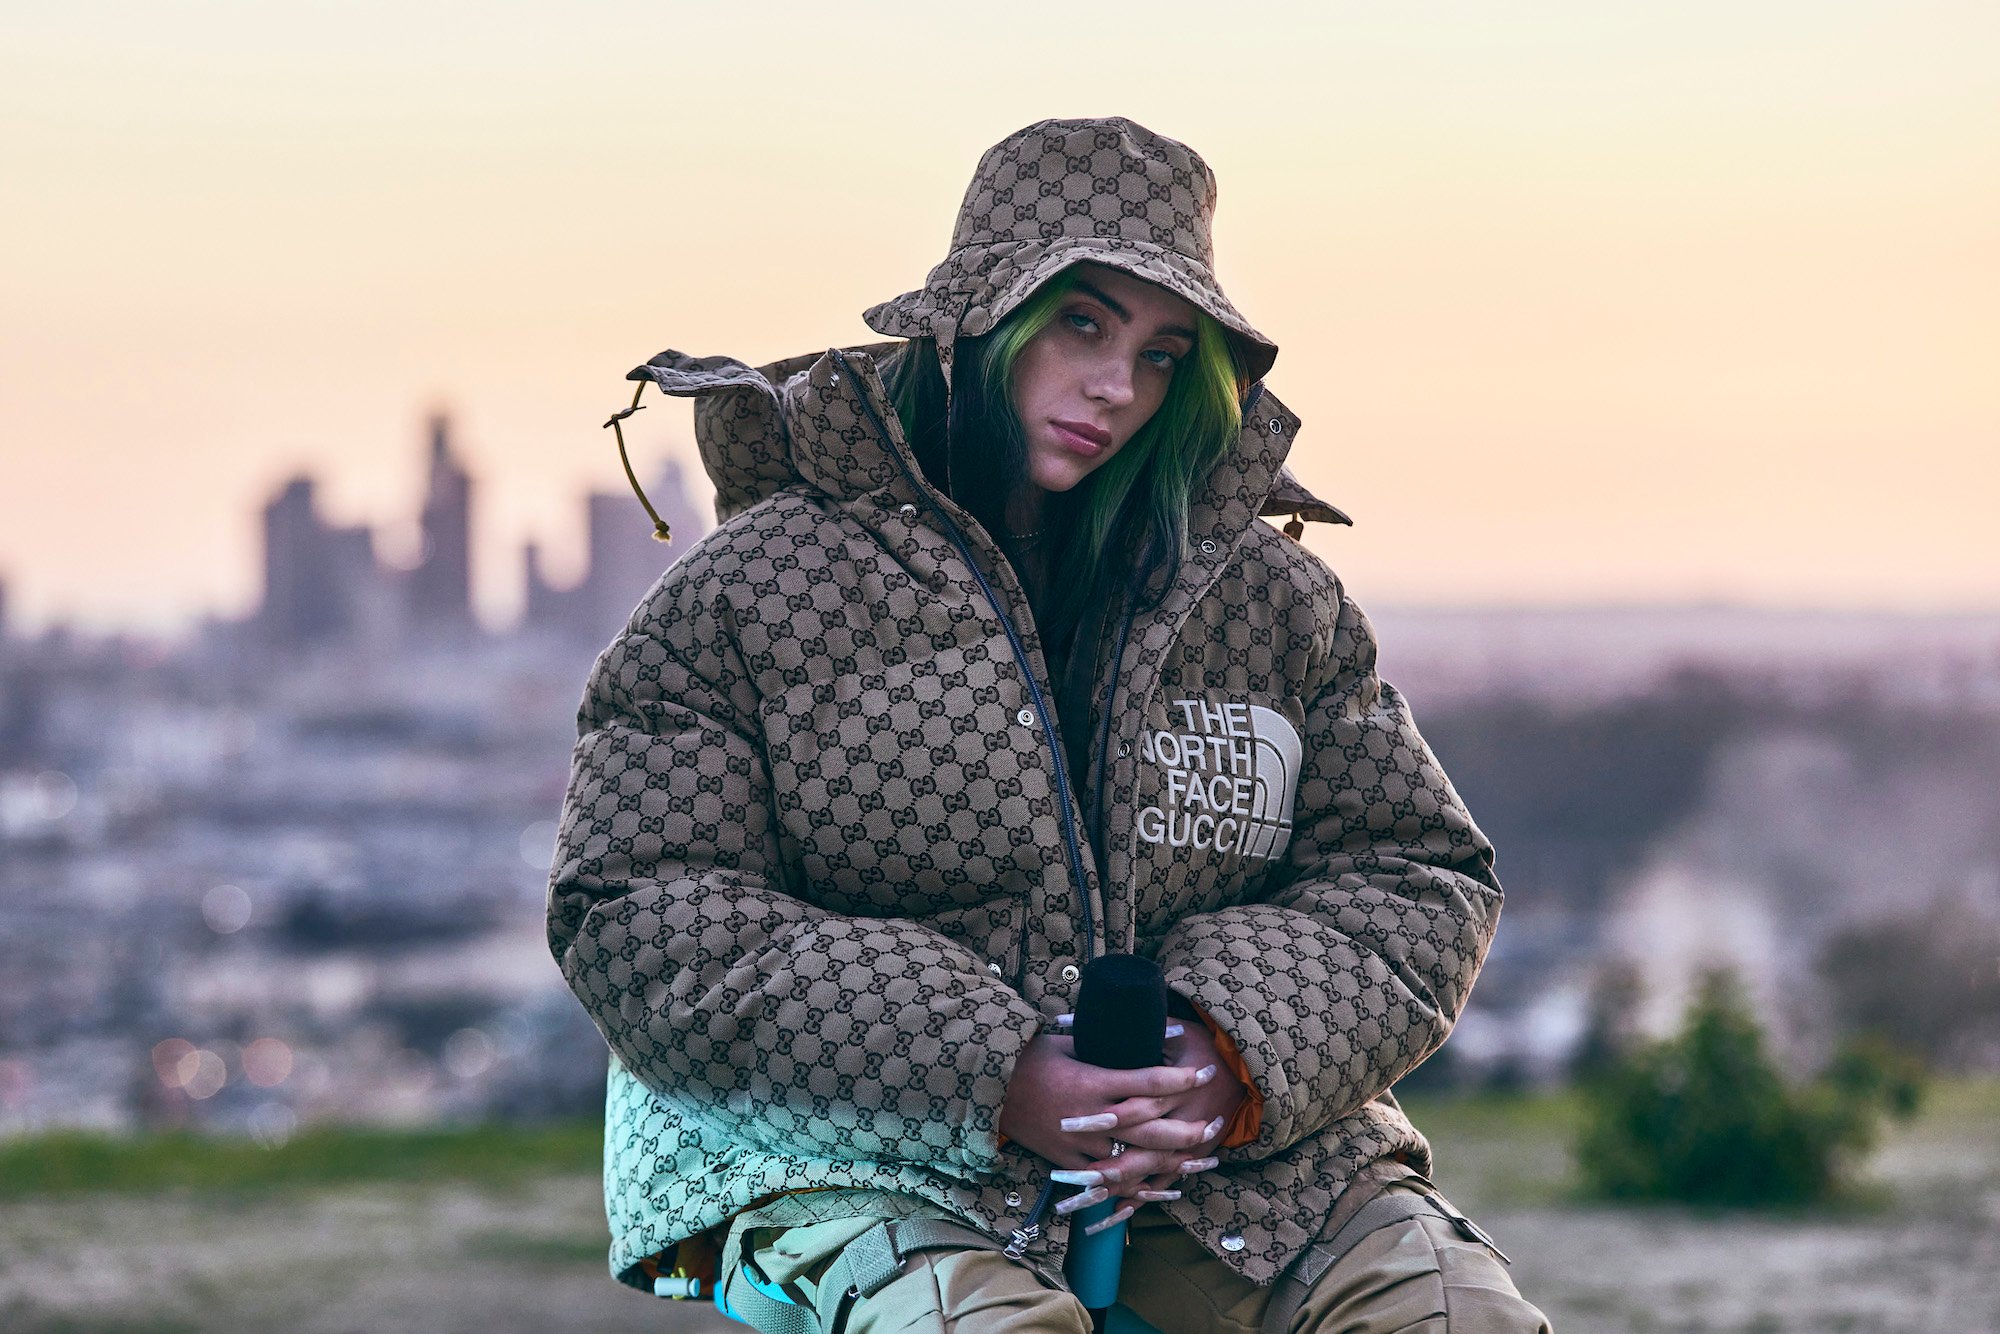 Billie Eilish in a Northface coat and hat